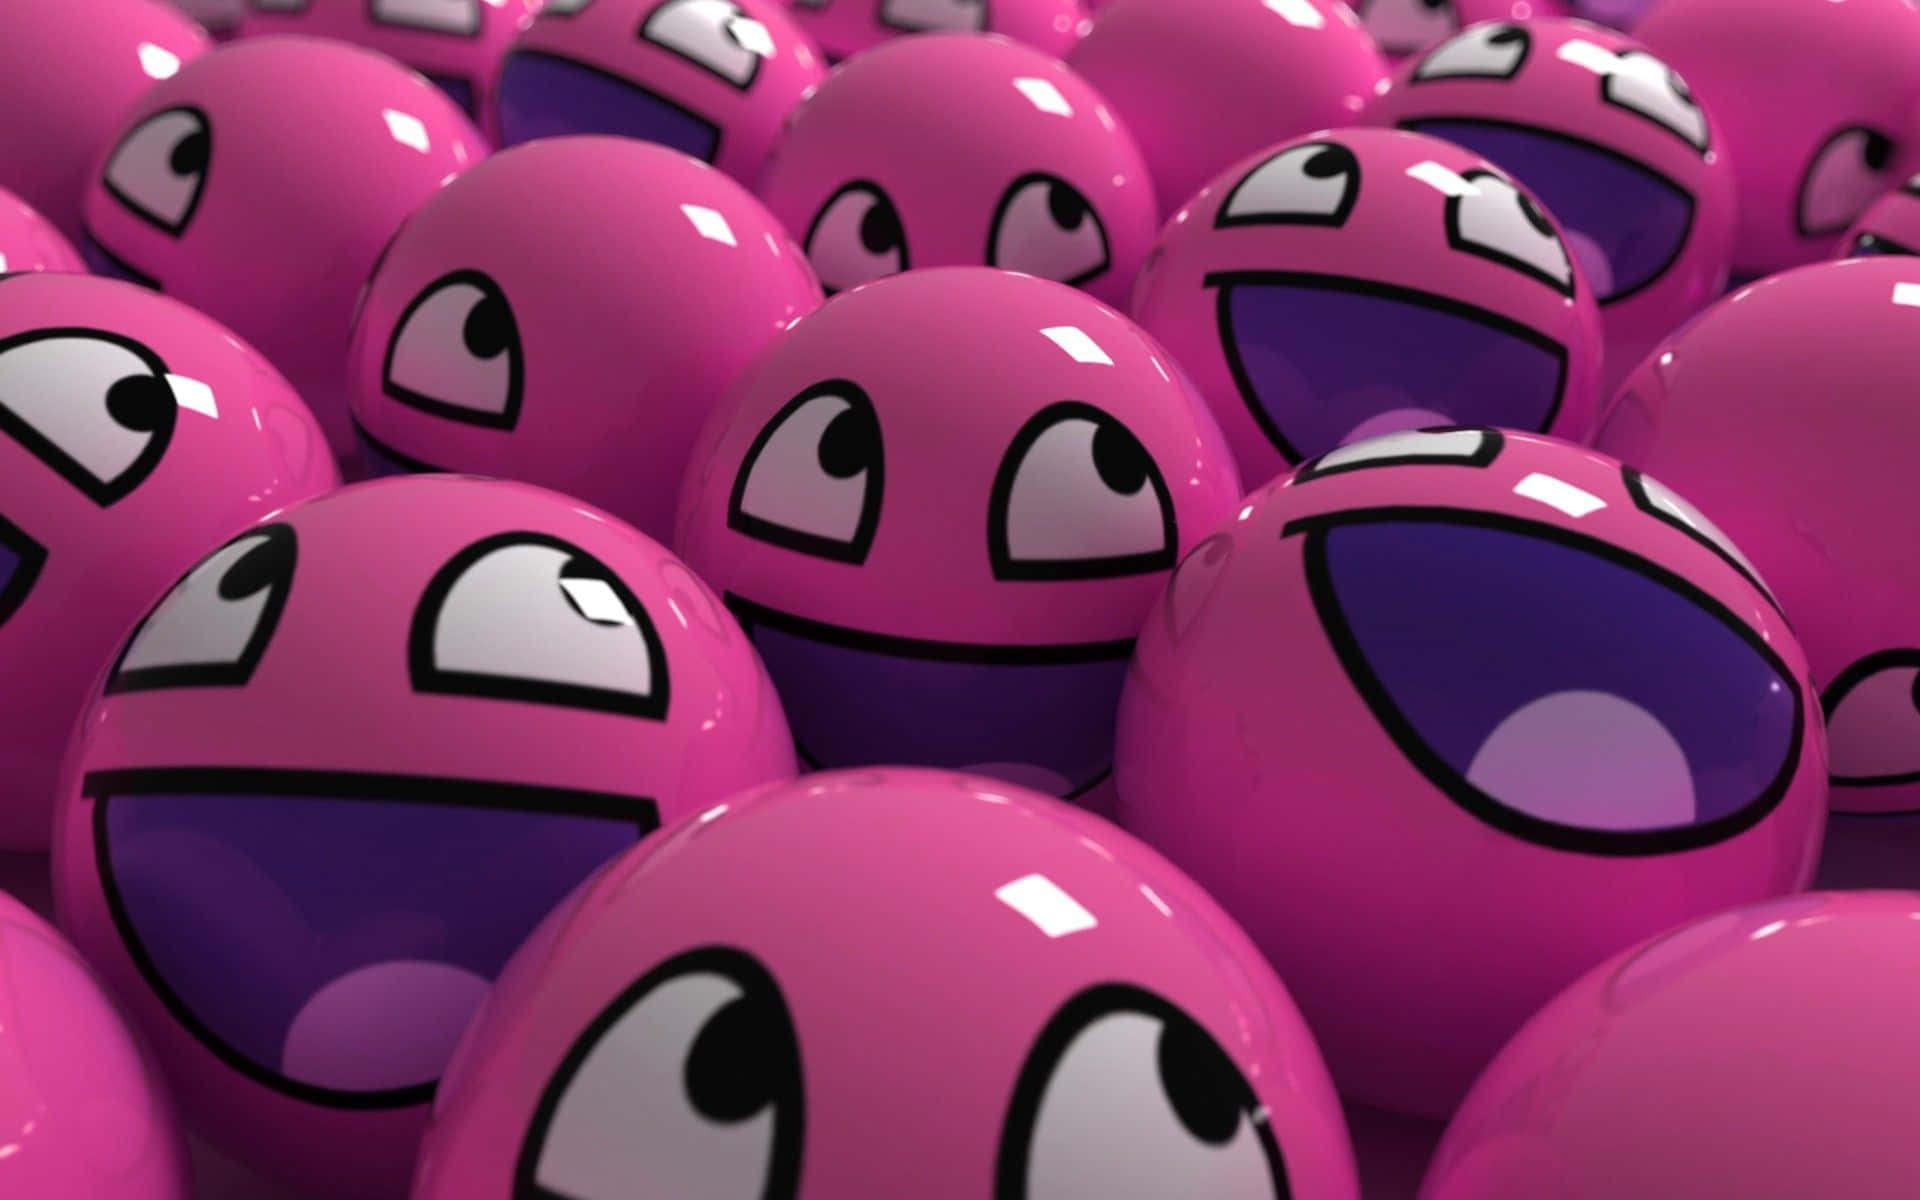 A Group Of Pink Eggs With Faces On Them Wallpaper